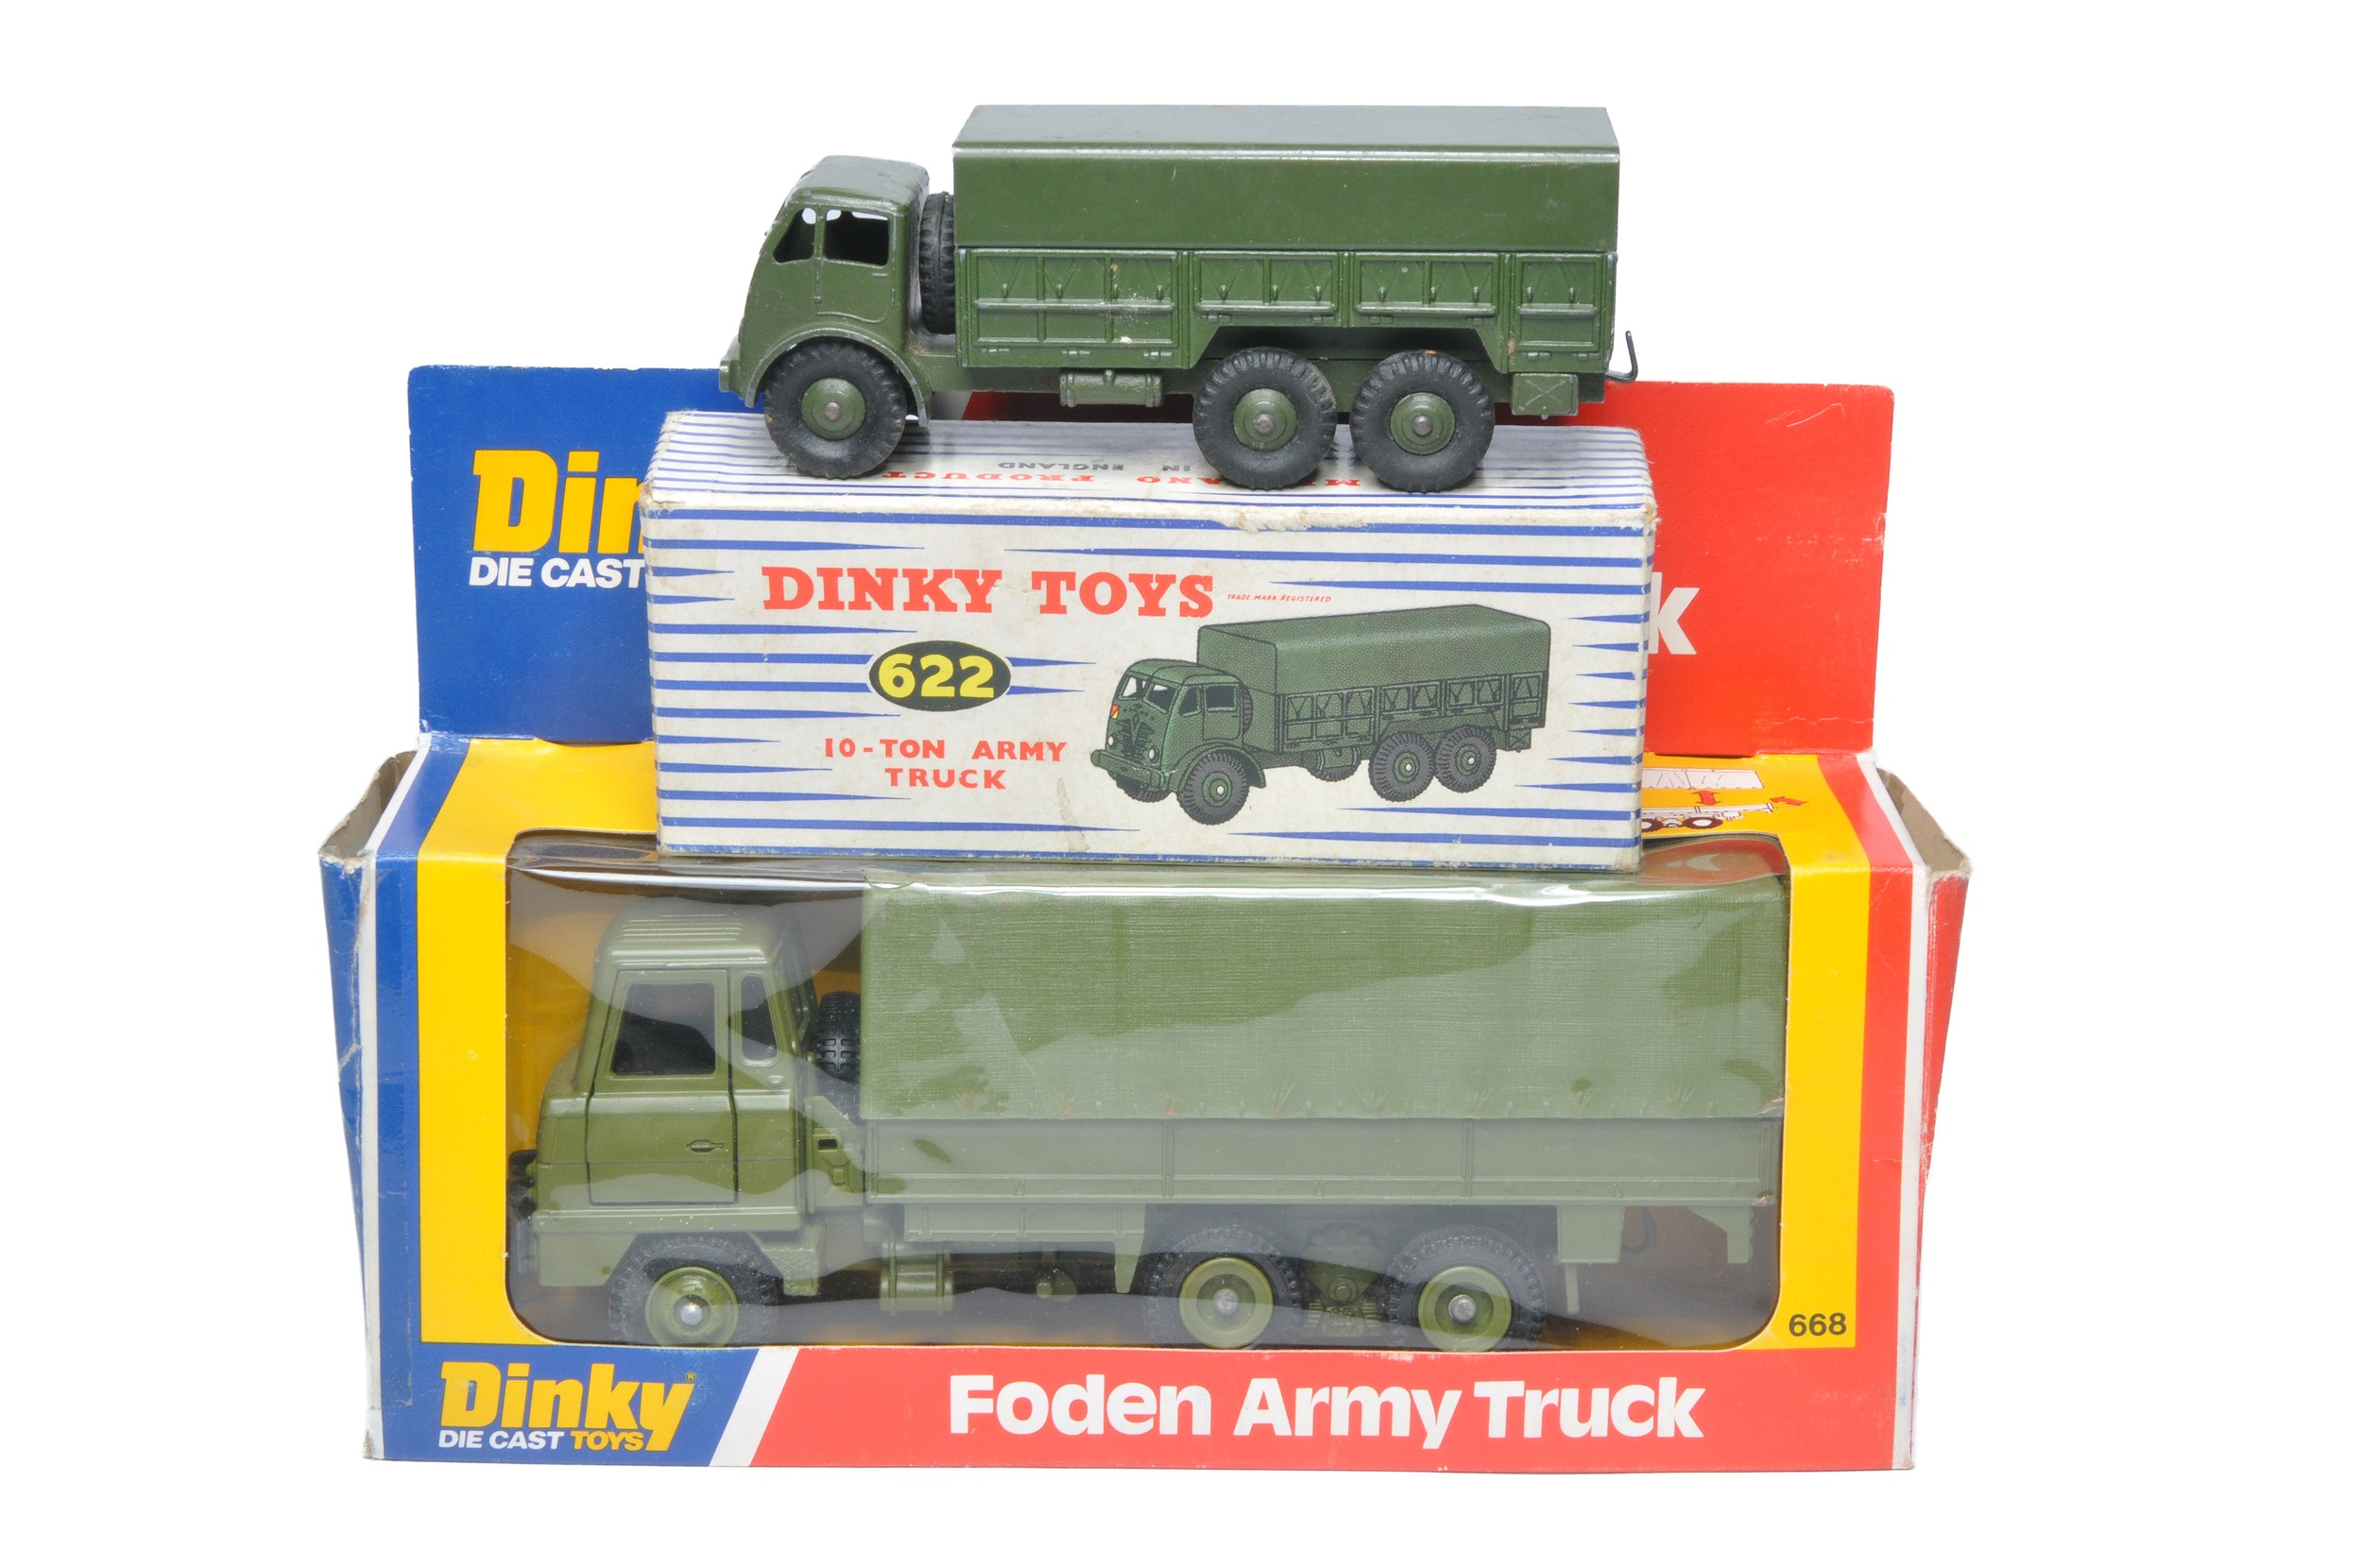 Dinky duo of No. 668 Foden Army Truck plus No. 622 10 Ton Army Truck. 668 is excellent in box, 622